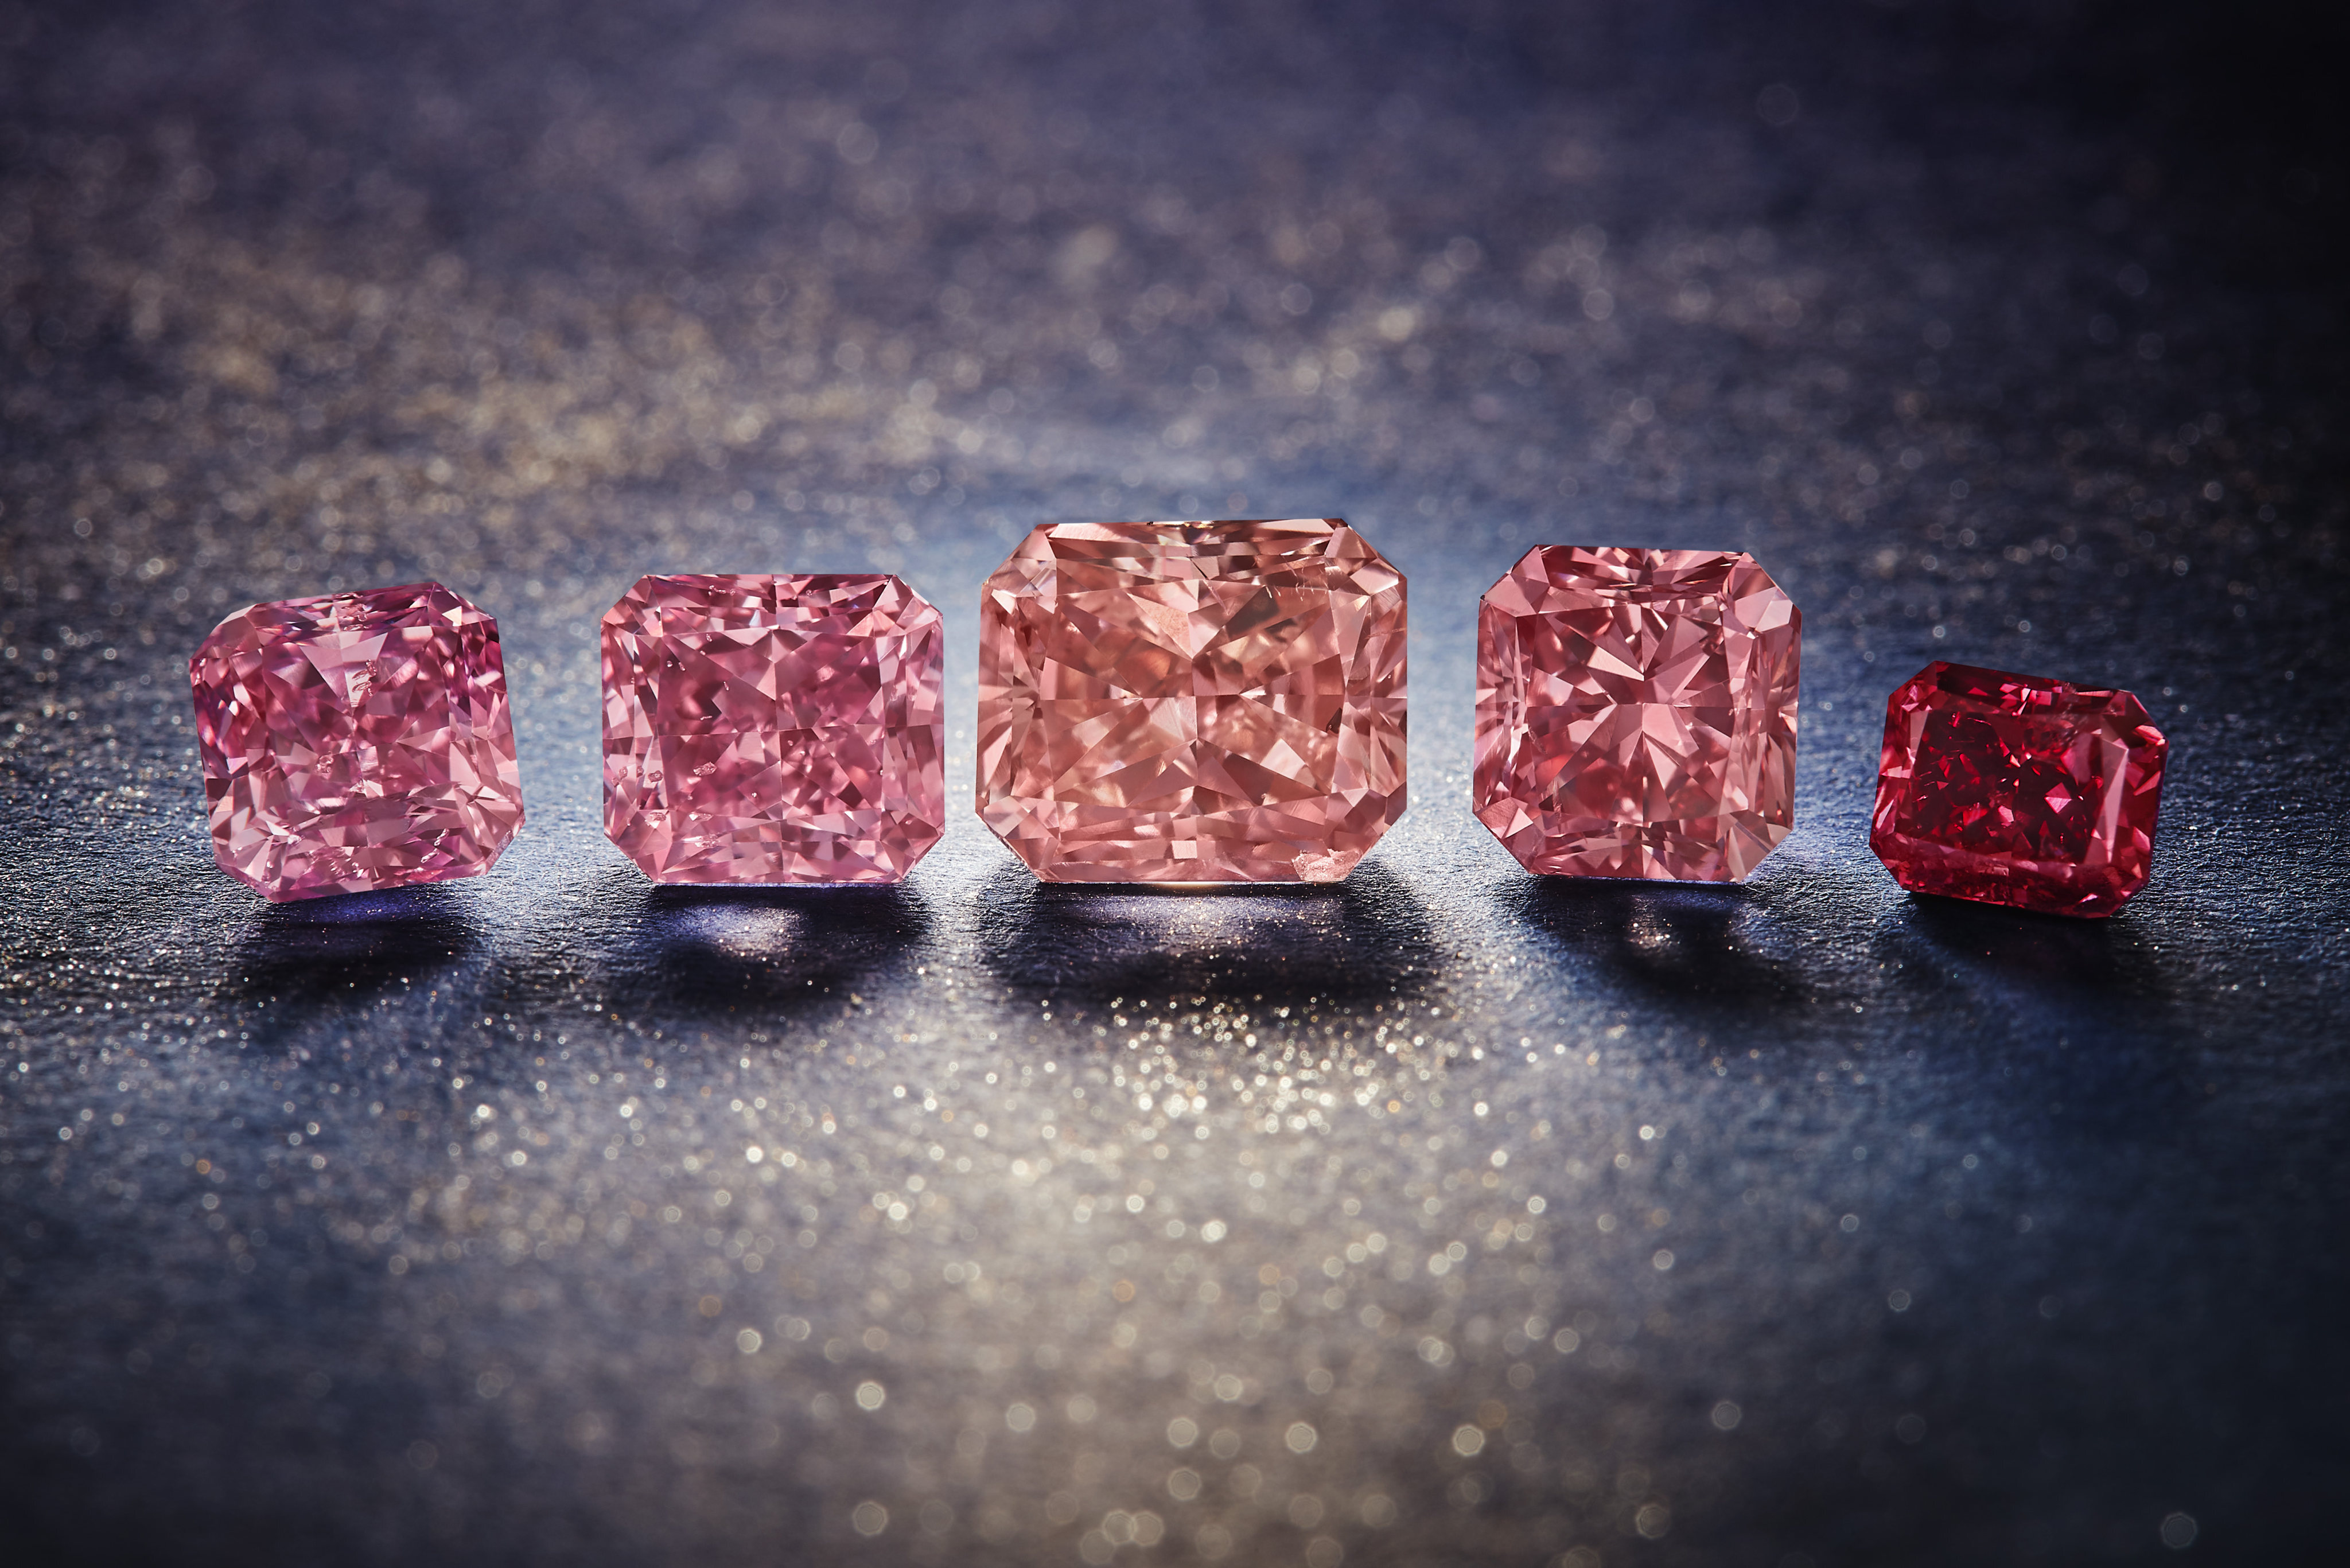 Last of their kind: a selection of pink diamonds from the final annual Argyle Pink Diamond Tender, now up for auction. Photos: Argyle Pink Diamond